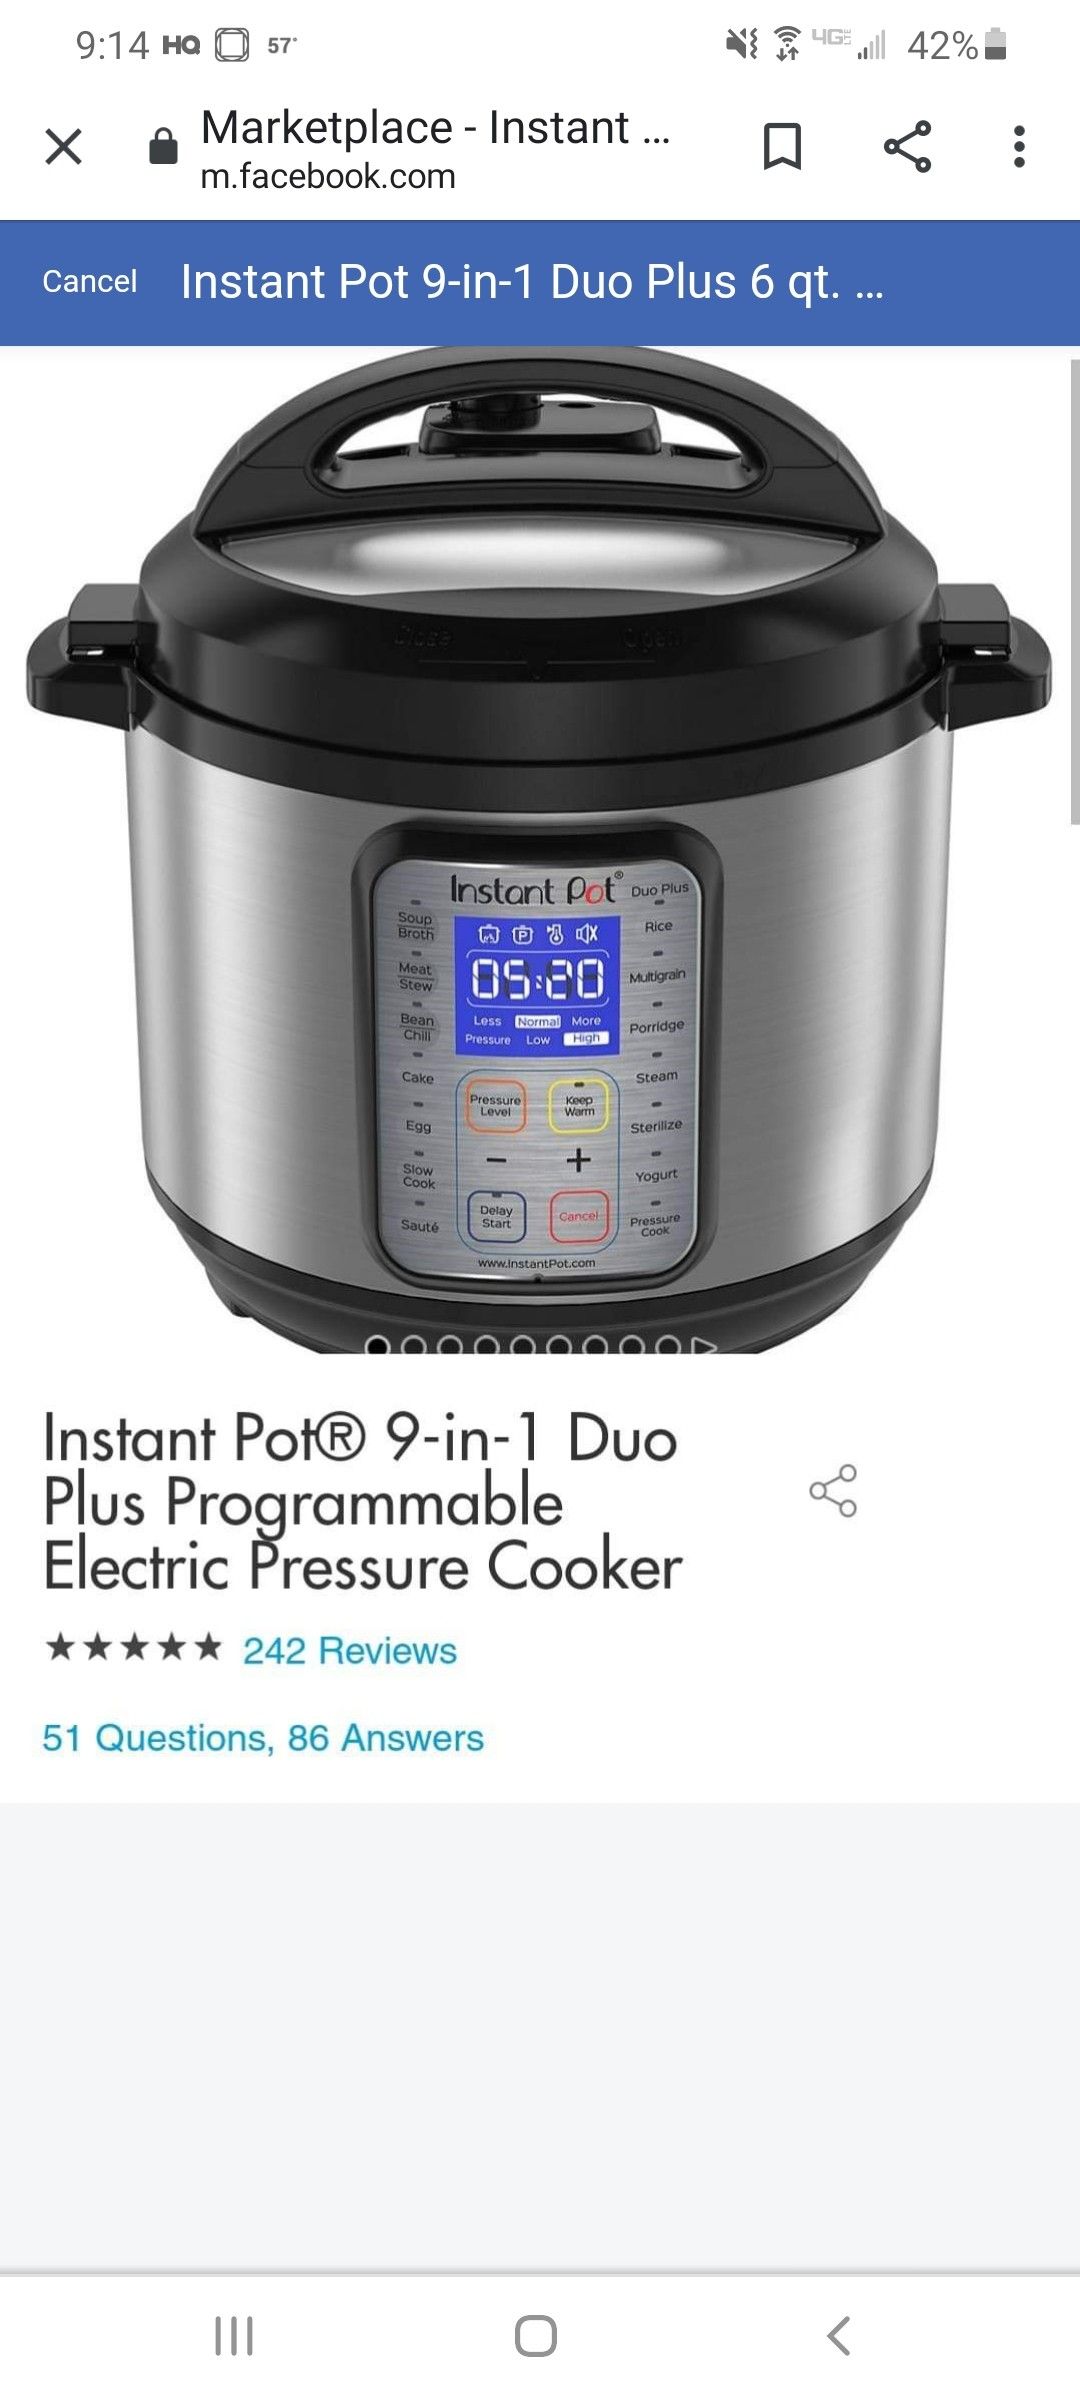 Instant Pot 9-in-1 Duo Plus 6 qt. Programmable Electric Pressure Cooker1